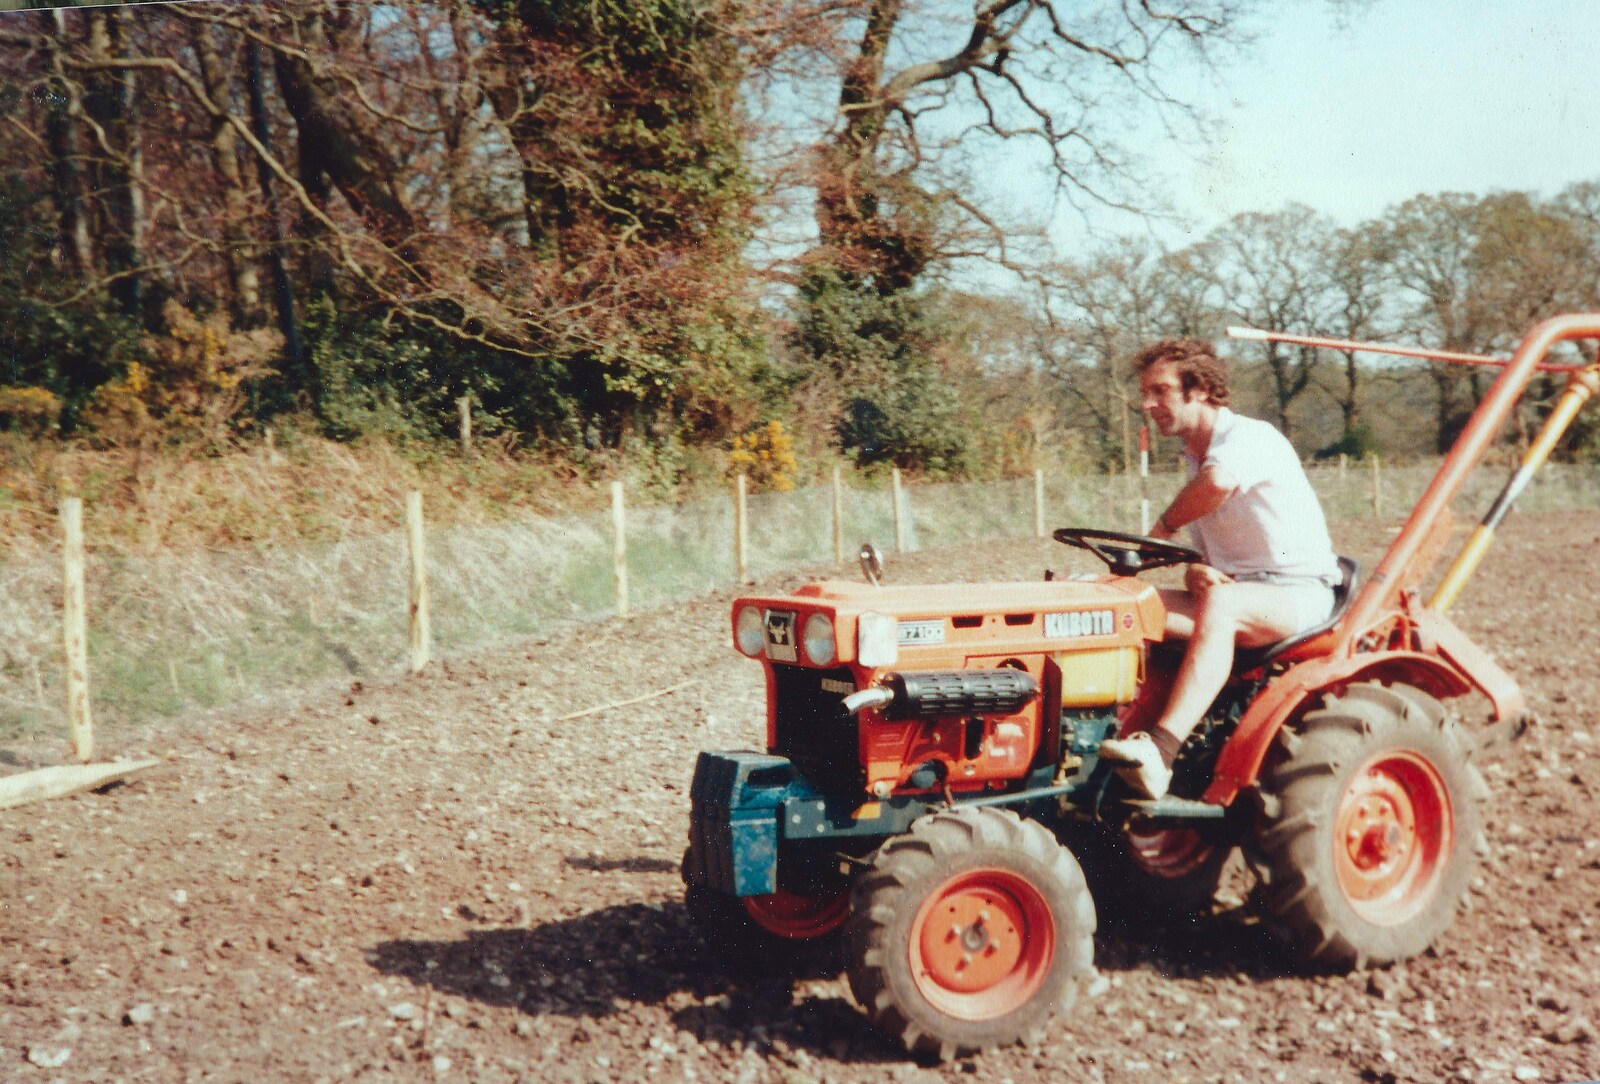 Mike drives around on the Kubota tractor from Constructing a Vineyard, Harrow Road, Bransgore, Dorset - 1st September 1981